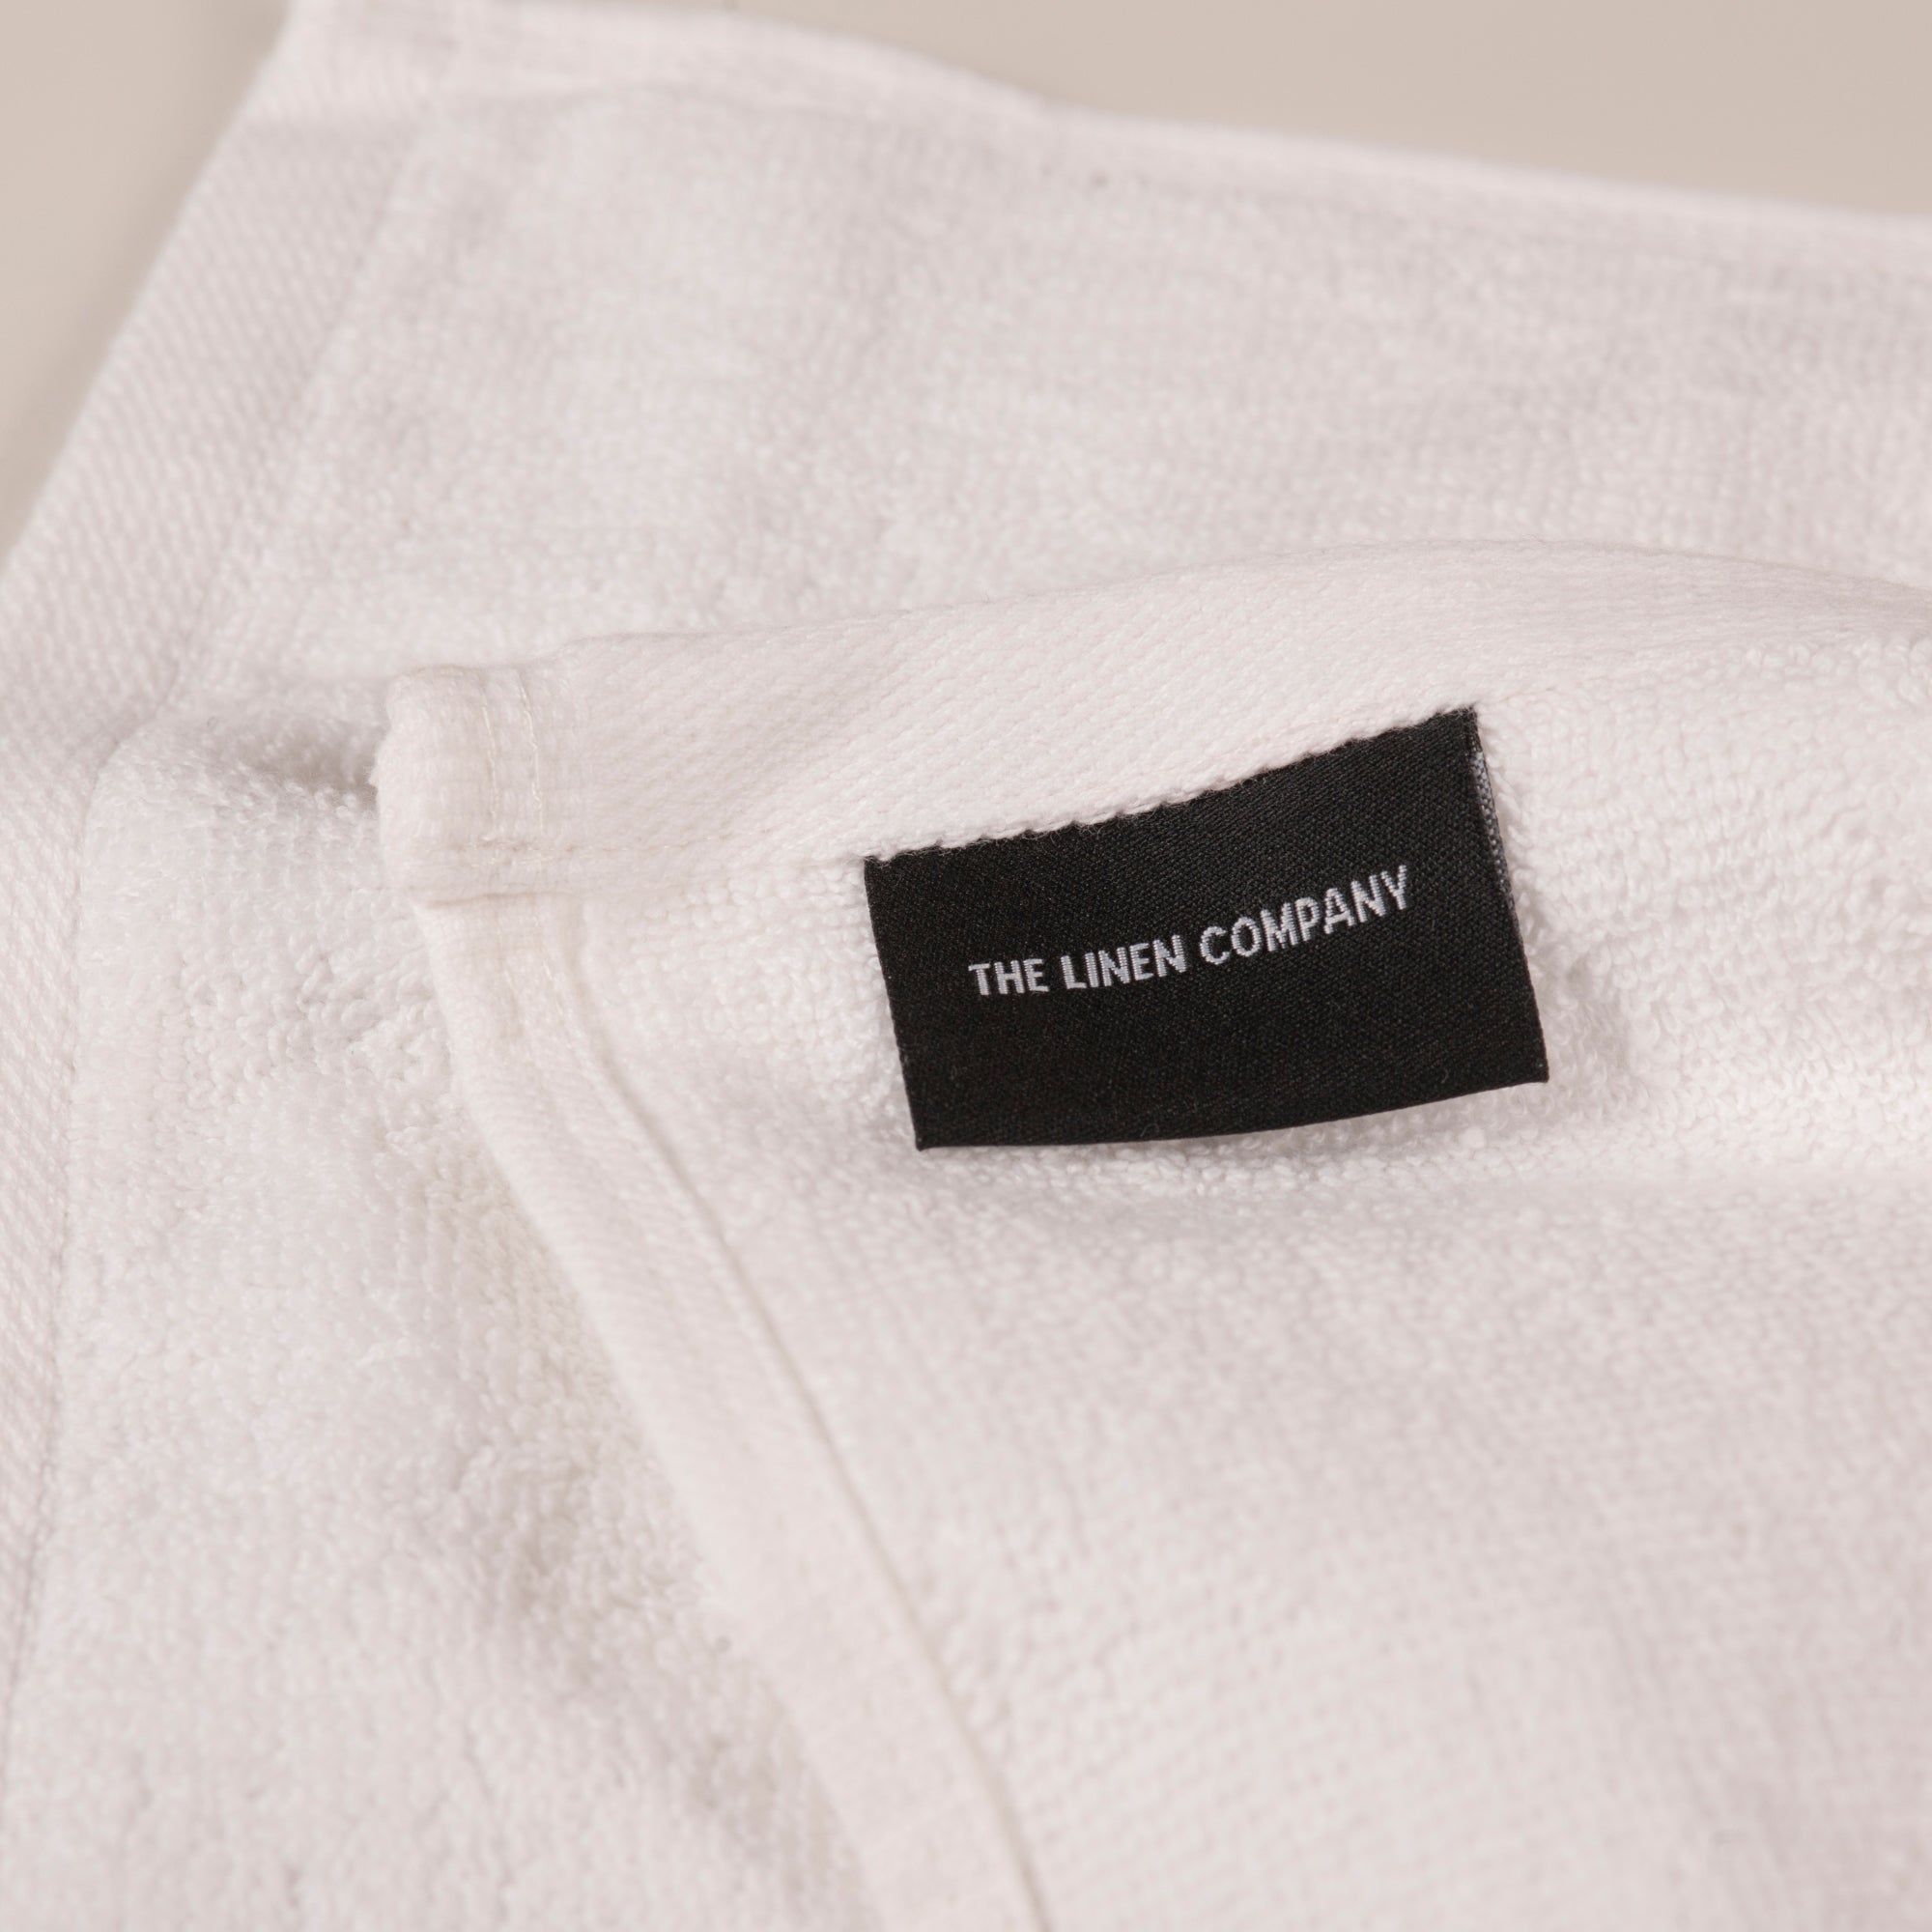 The Linen Company Accessories Small Hand Towel White Plain Hand Towel